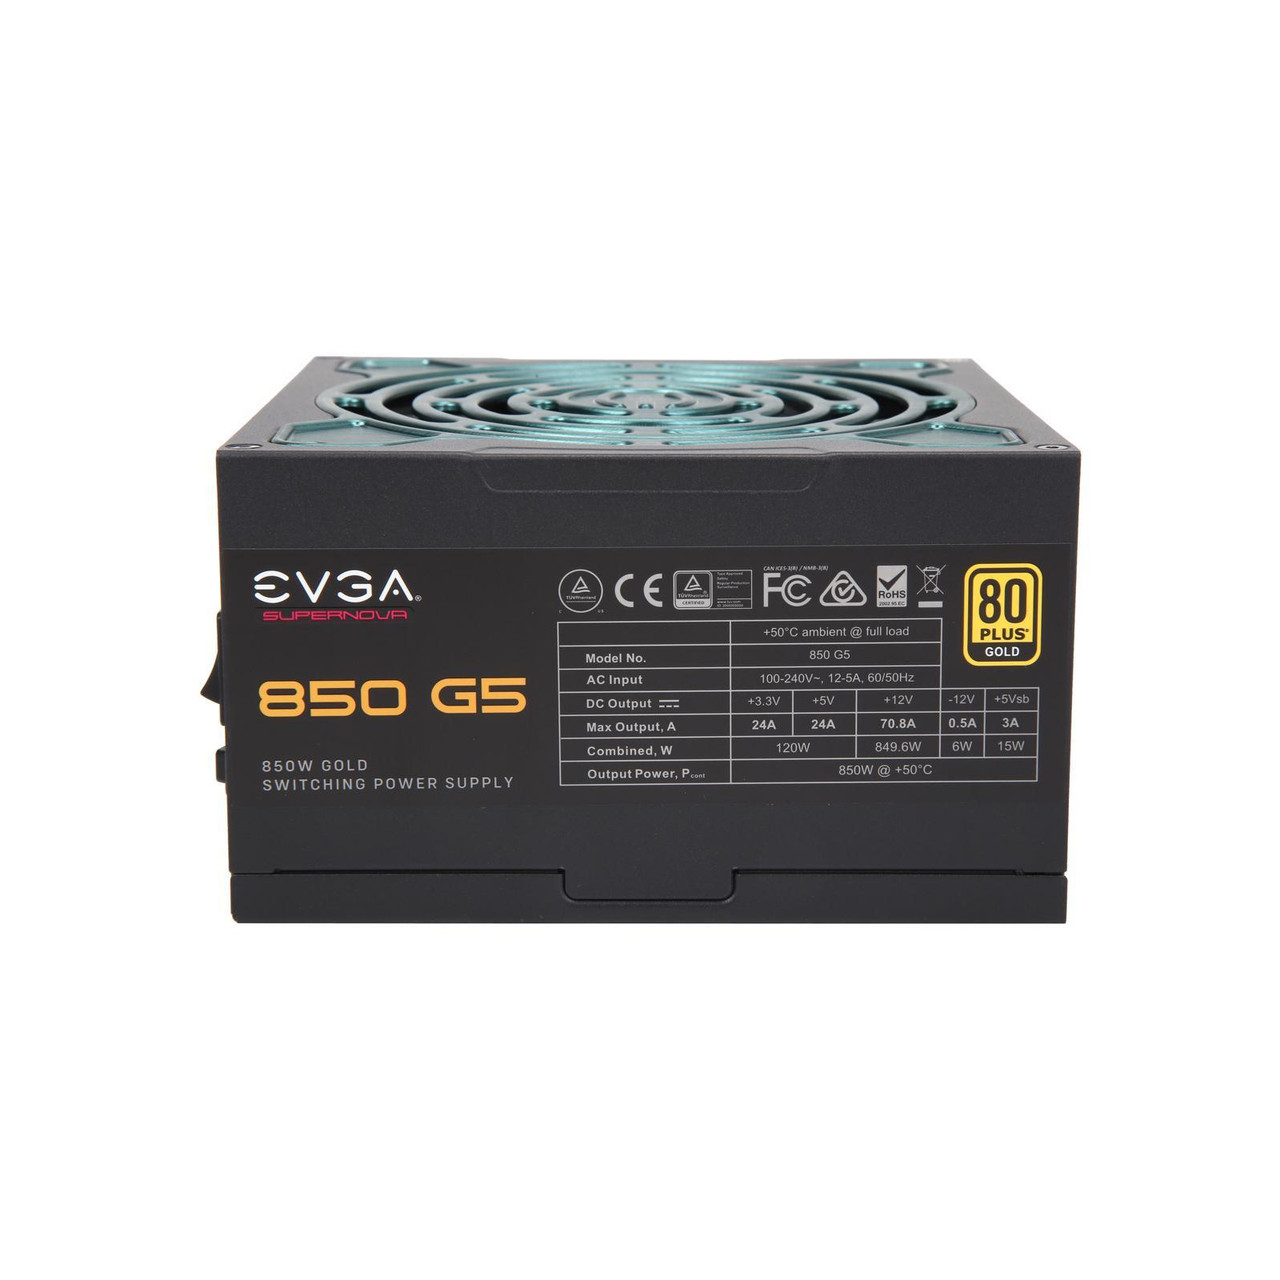 EVGA 220-G5-0850-X1 SuperNOVA 850 G5, 80 Plus Gold 850W, Fully Modular, Eco Mode with FDB Fan, 10 Year Warranty, Includes Power ON Self Tester, Compact 150mm Size, Power Supply